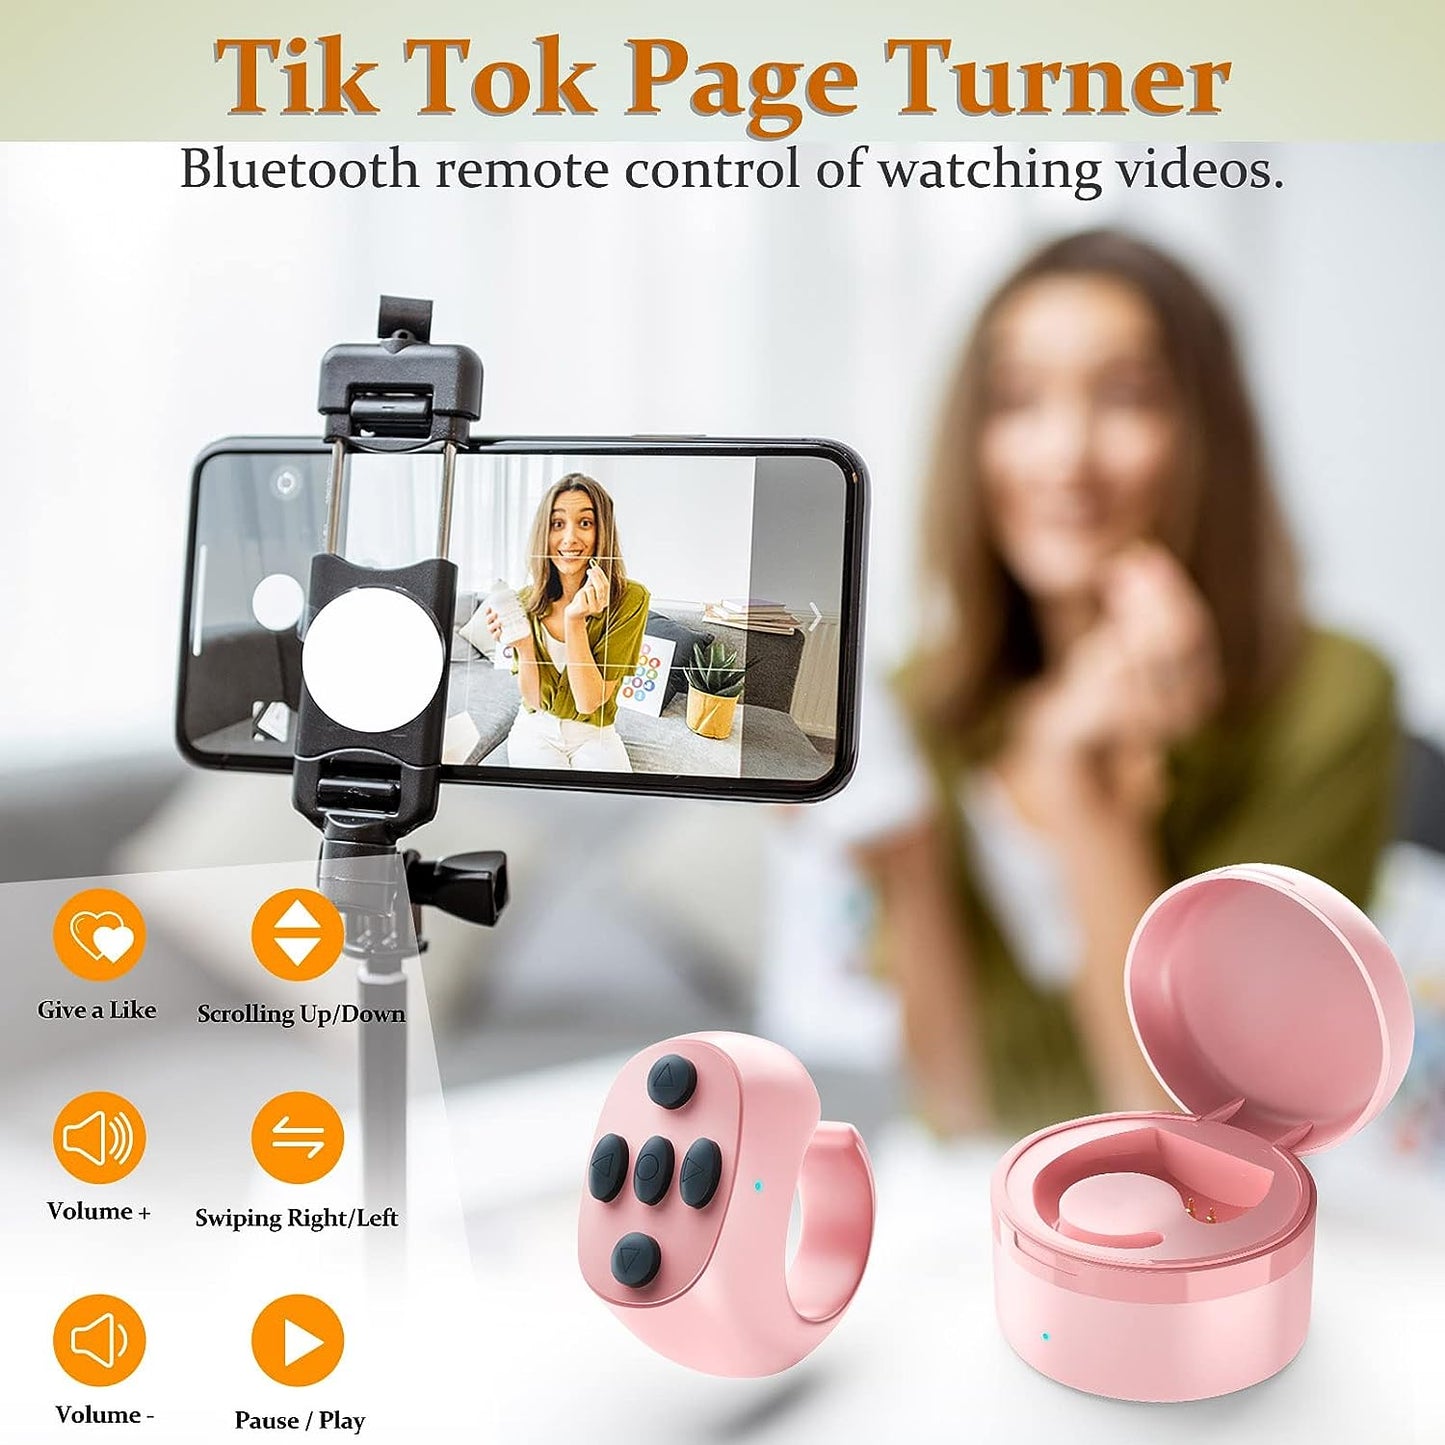 TikTok Remote Control Ring Kindle APP Page Turner, TIK Tok Scrolling Ring Bluetooth Camera Shutter Selfie Video Recording Remote with Charging Case for iPad iPhone Android (Black)